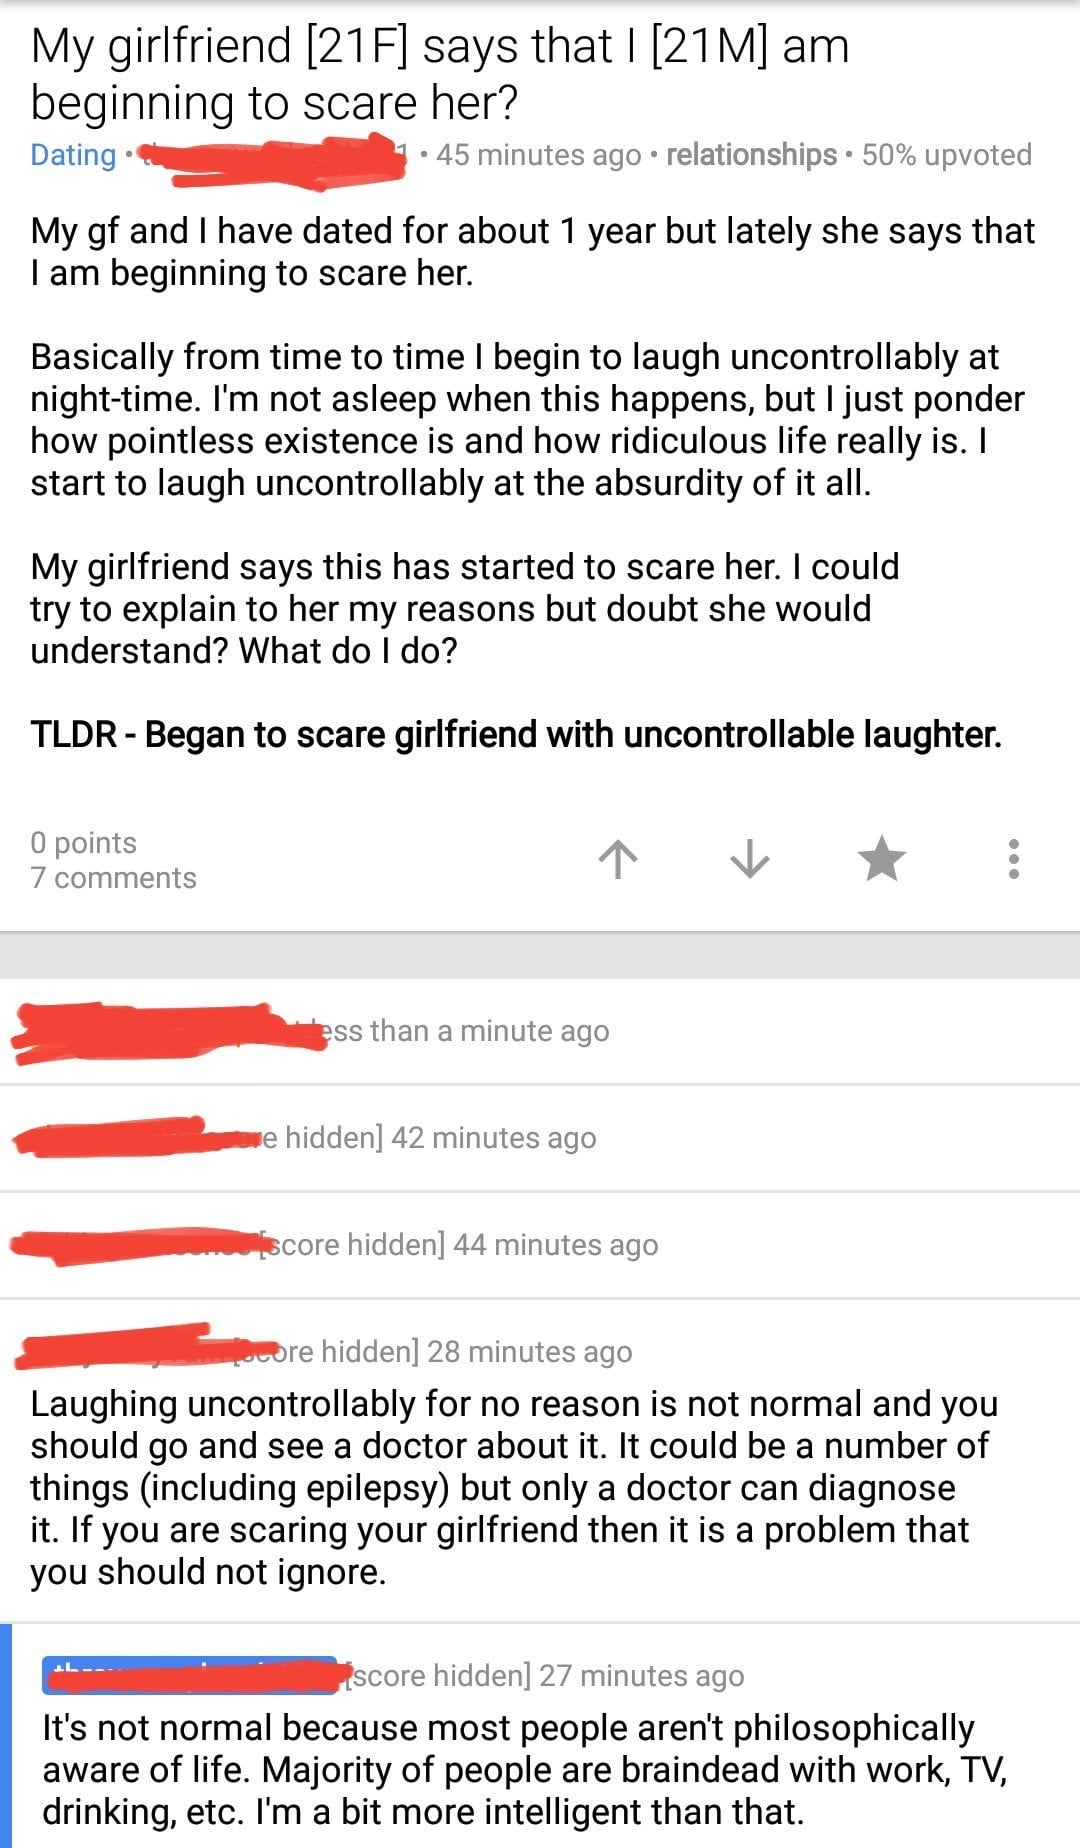 The image contains a Reddit post where a user shares concerns about uncontrollable laughter in serious situations and seeks advice